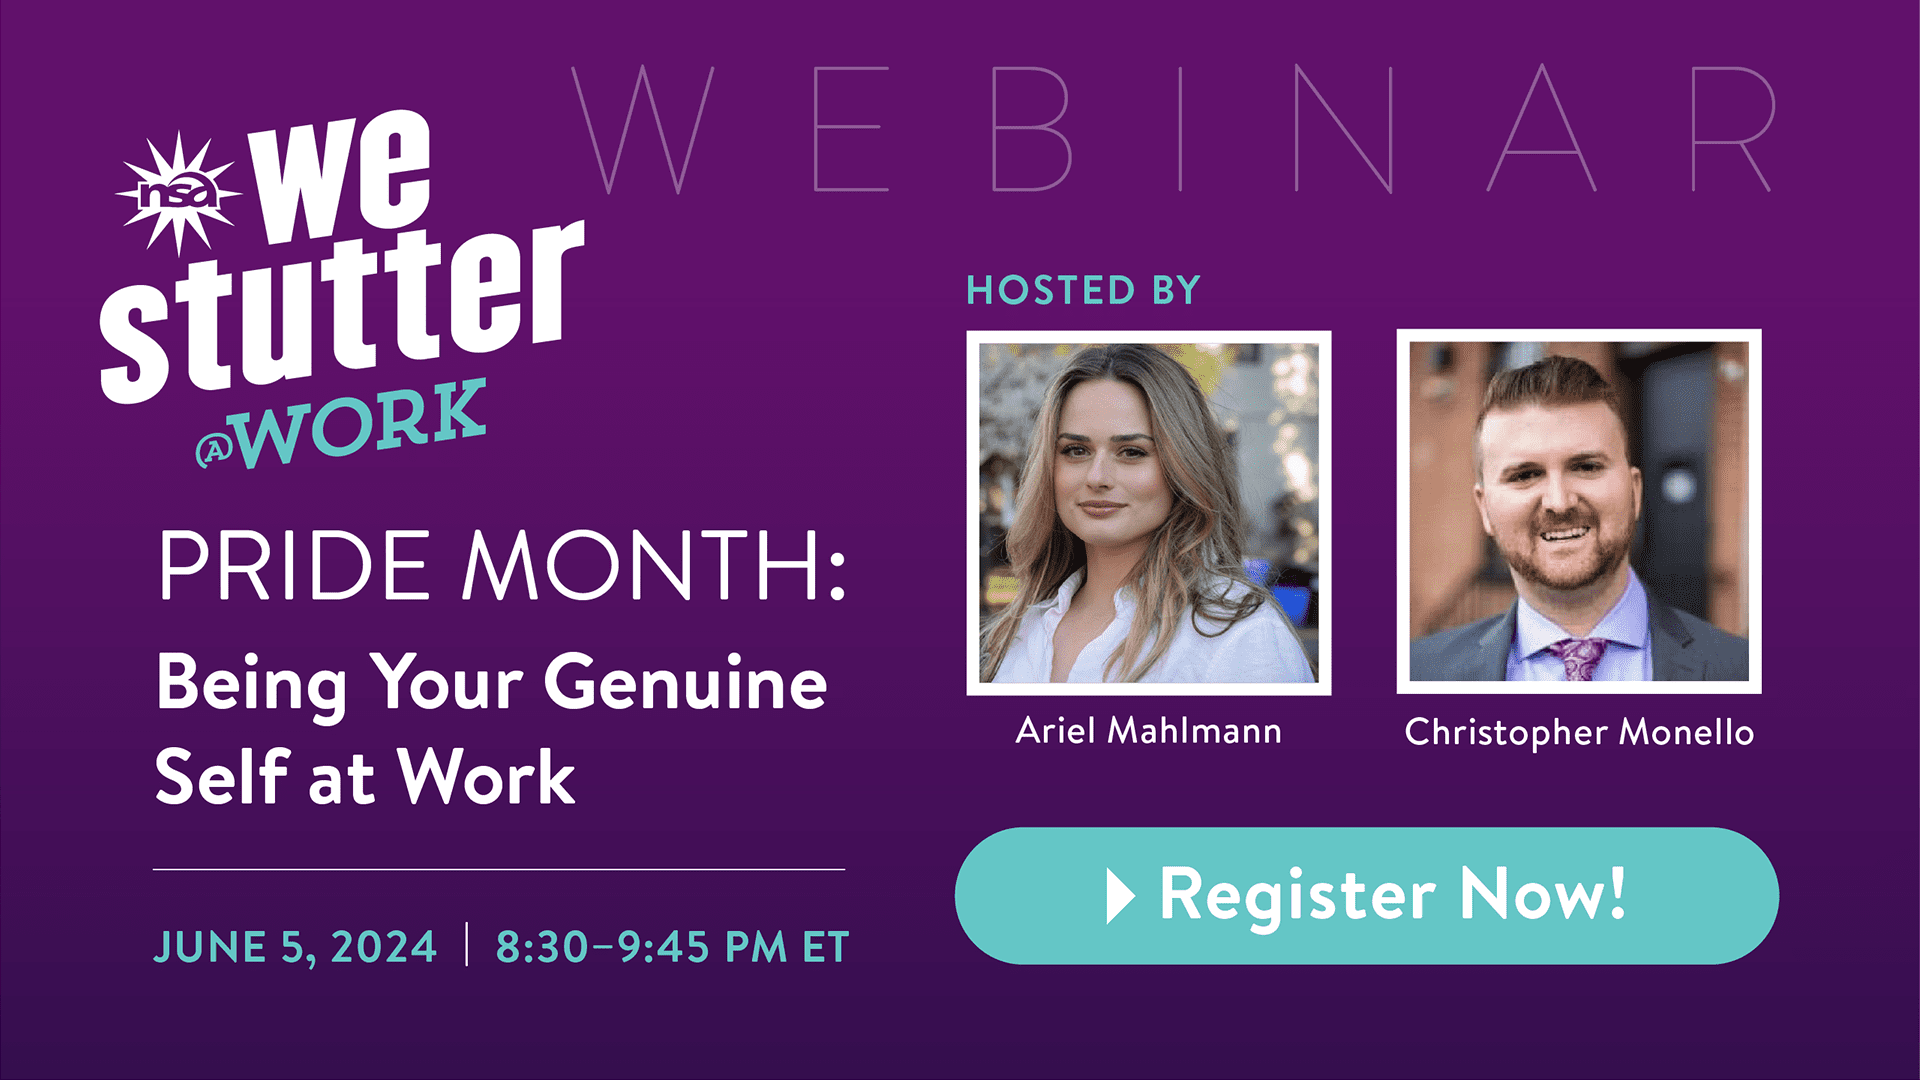 Webinar announcement graphic titled "we stutter @work - pride month: being your genuine self at work," featuring dates, registration info, and photos of speakers ariel mahlmann and christopher monello.